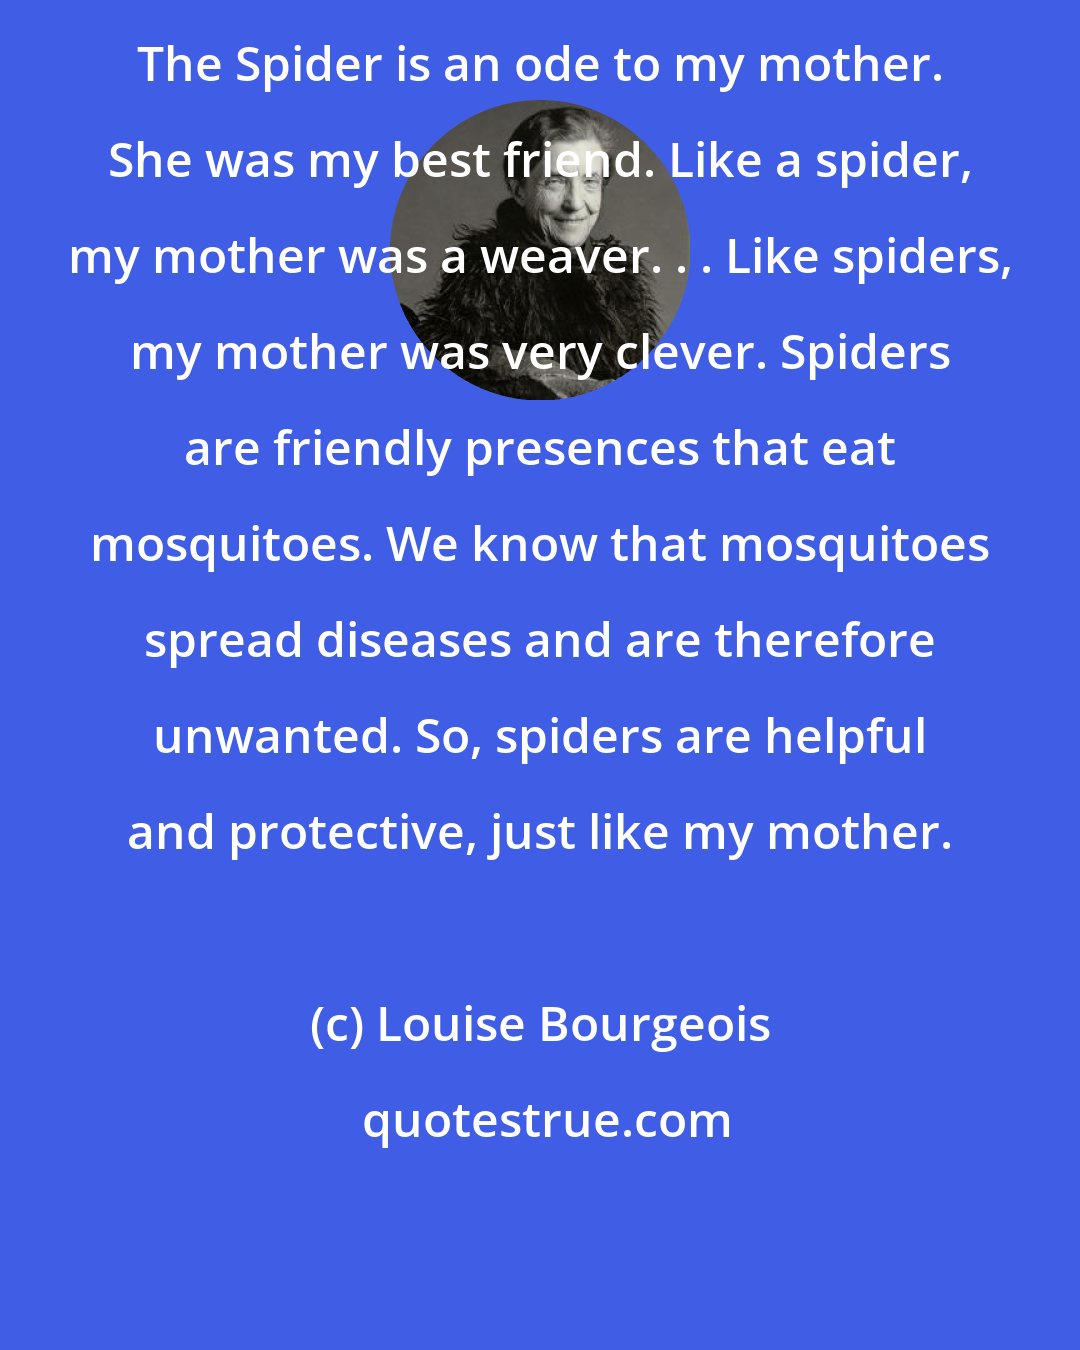 Louise Bourgeois: The Spider is an ode to my mother. She was my best friend. Like a spider, my mother was a weaver. . . Like spiders, my mother was very clever. Spiders are friendly presences that eat mosquitoes. We know that mosquitoes spread diseases and are therefore unwanted. So, spiders are helpful and protective, just like my mother.